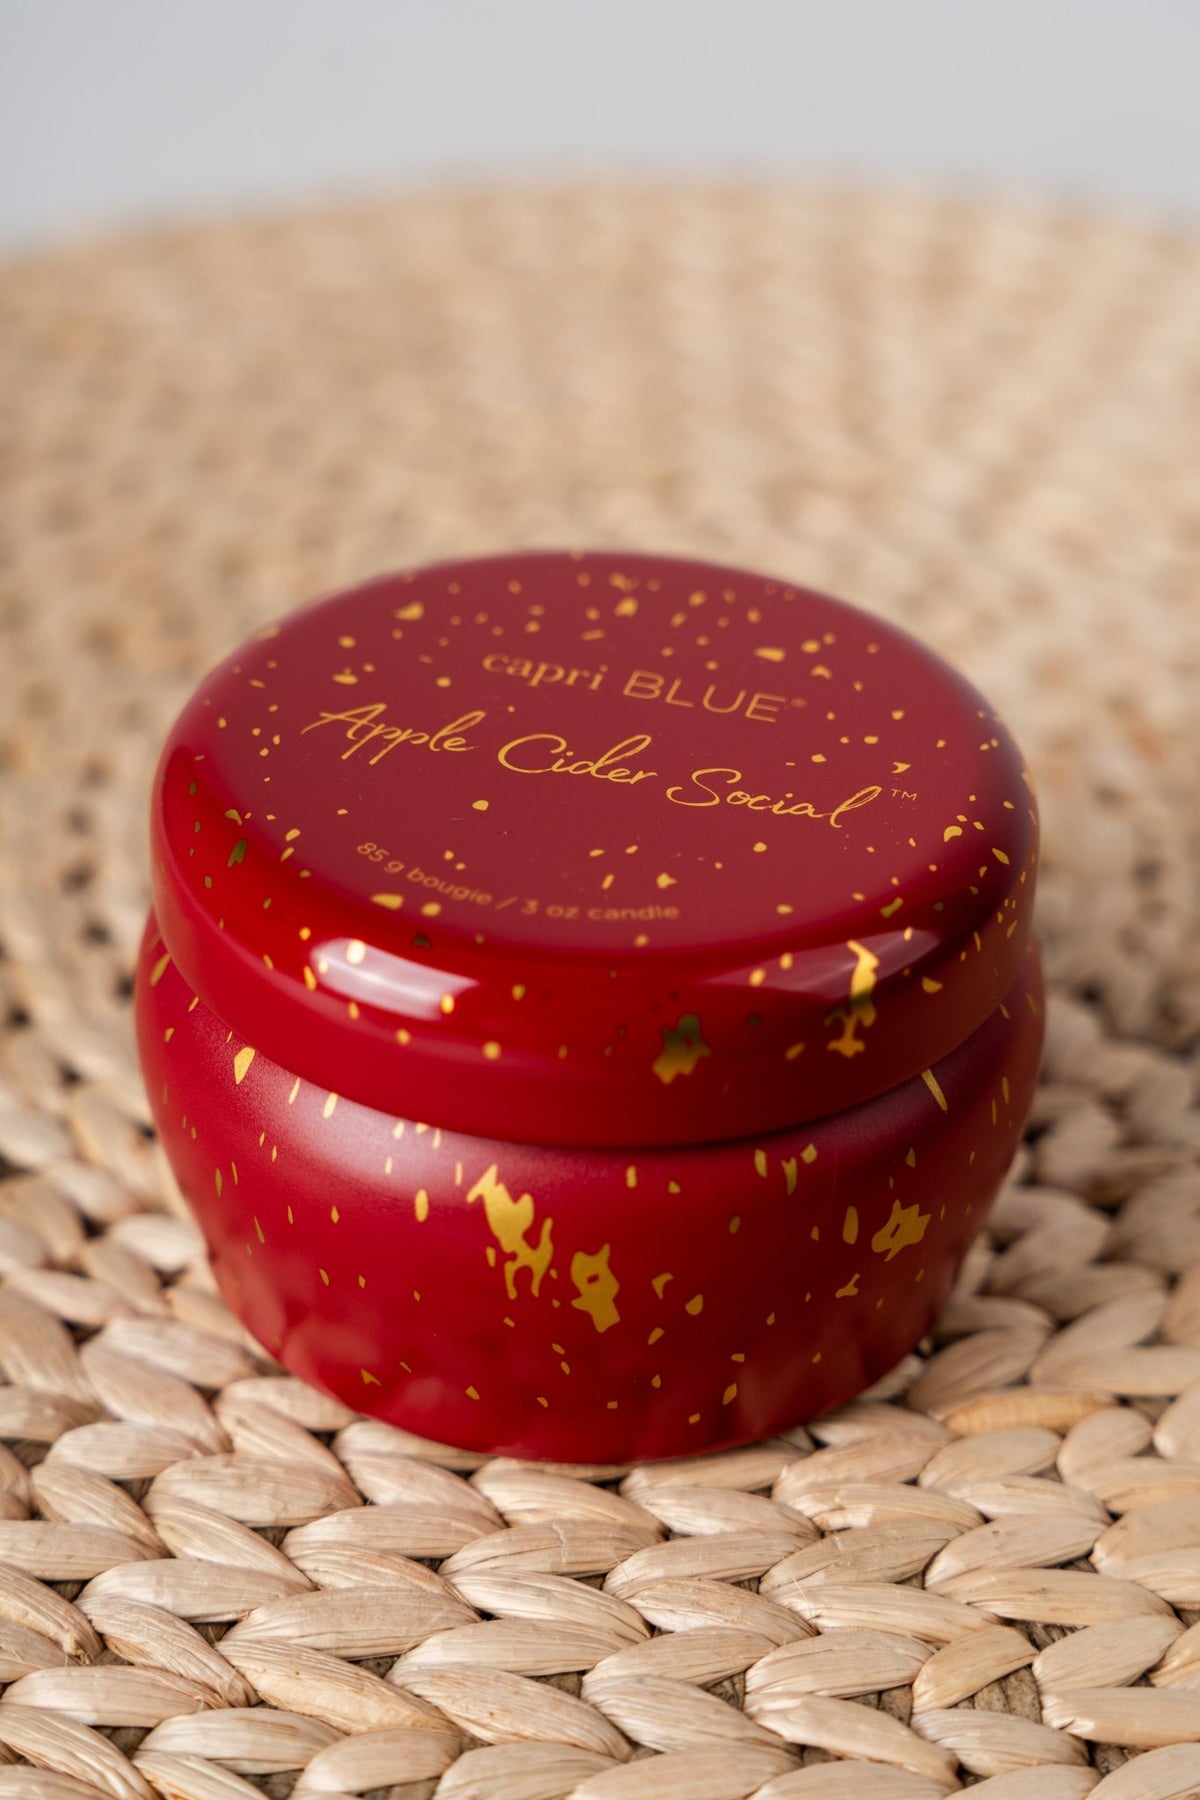 Capri Blue glimmer mini tin candle apple cider 3oz - Trendy Candles and Scents at Lush Fashion Lounge Boutique in Oklahoma City